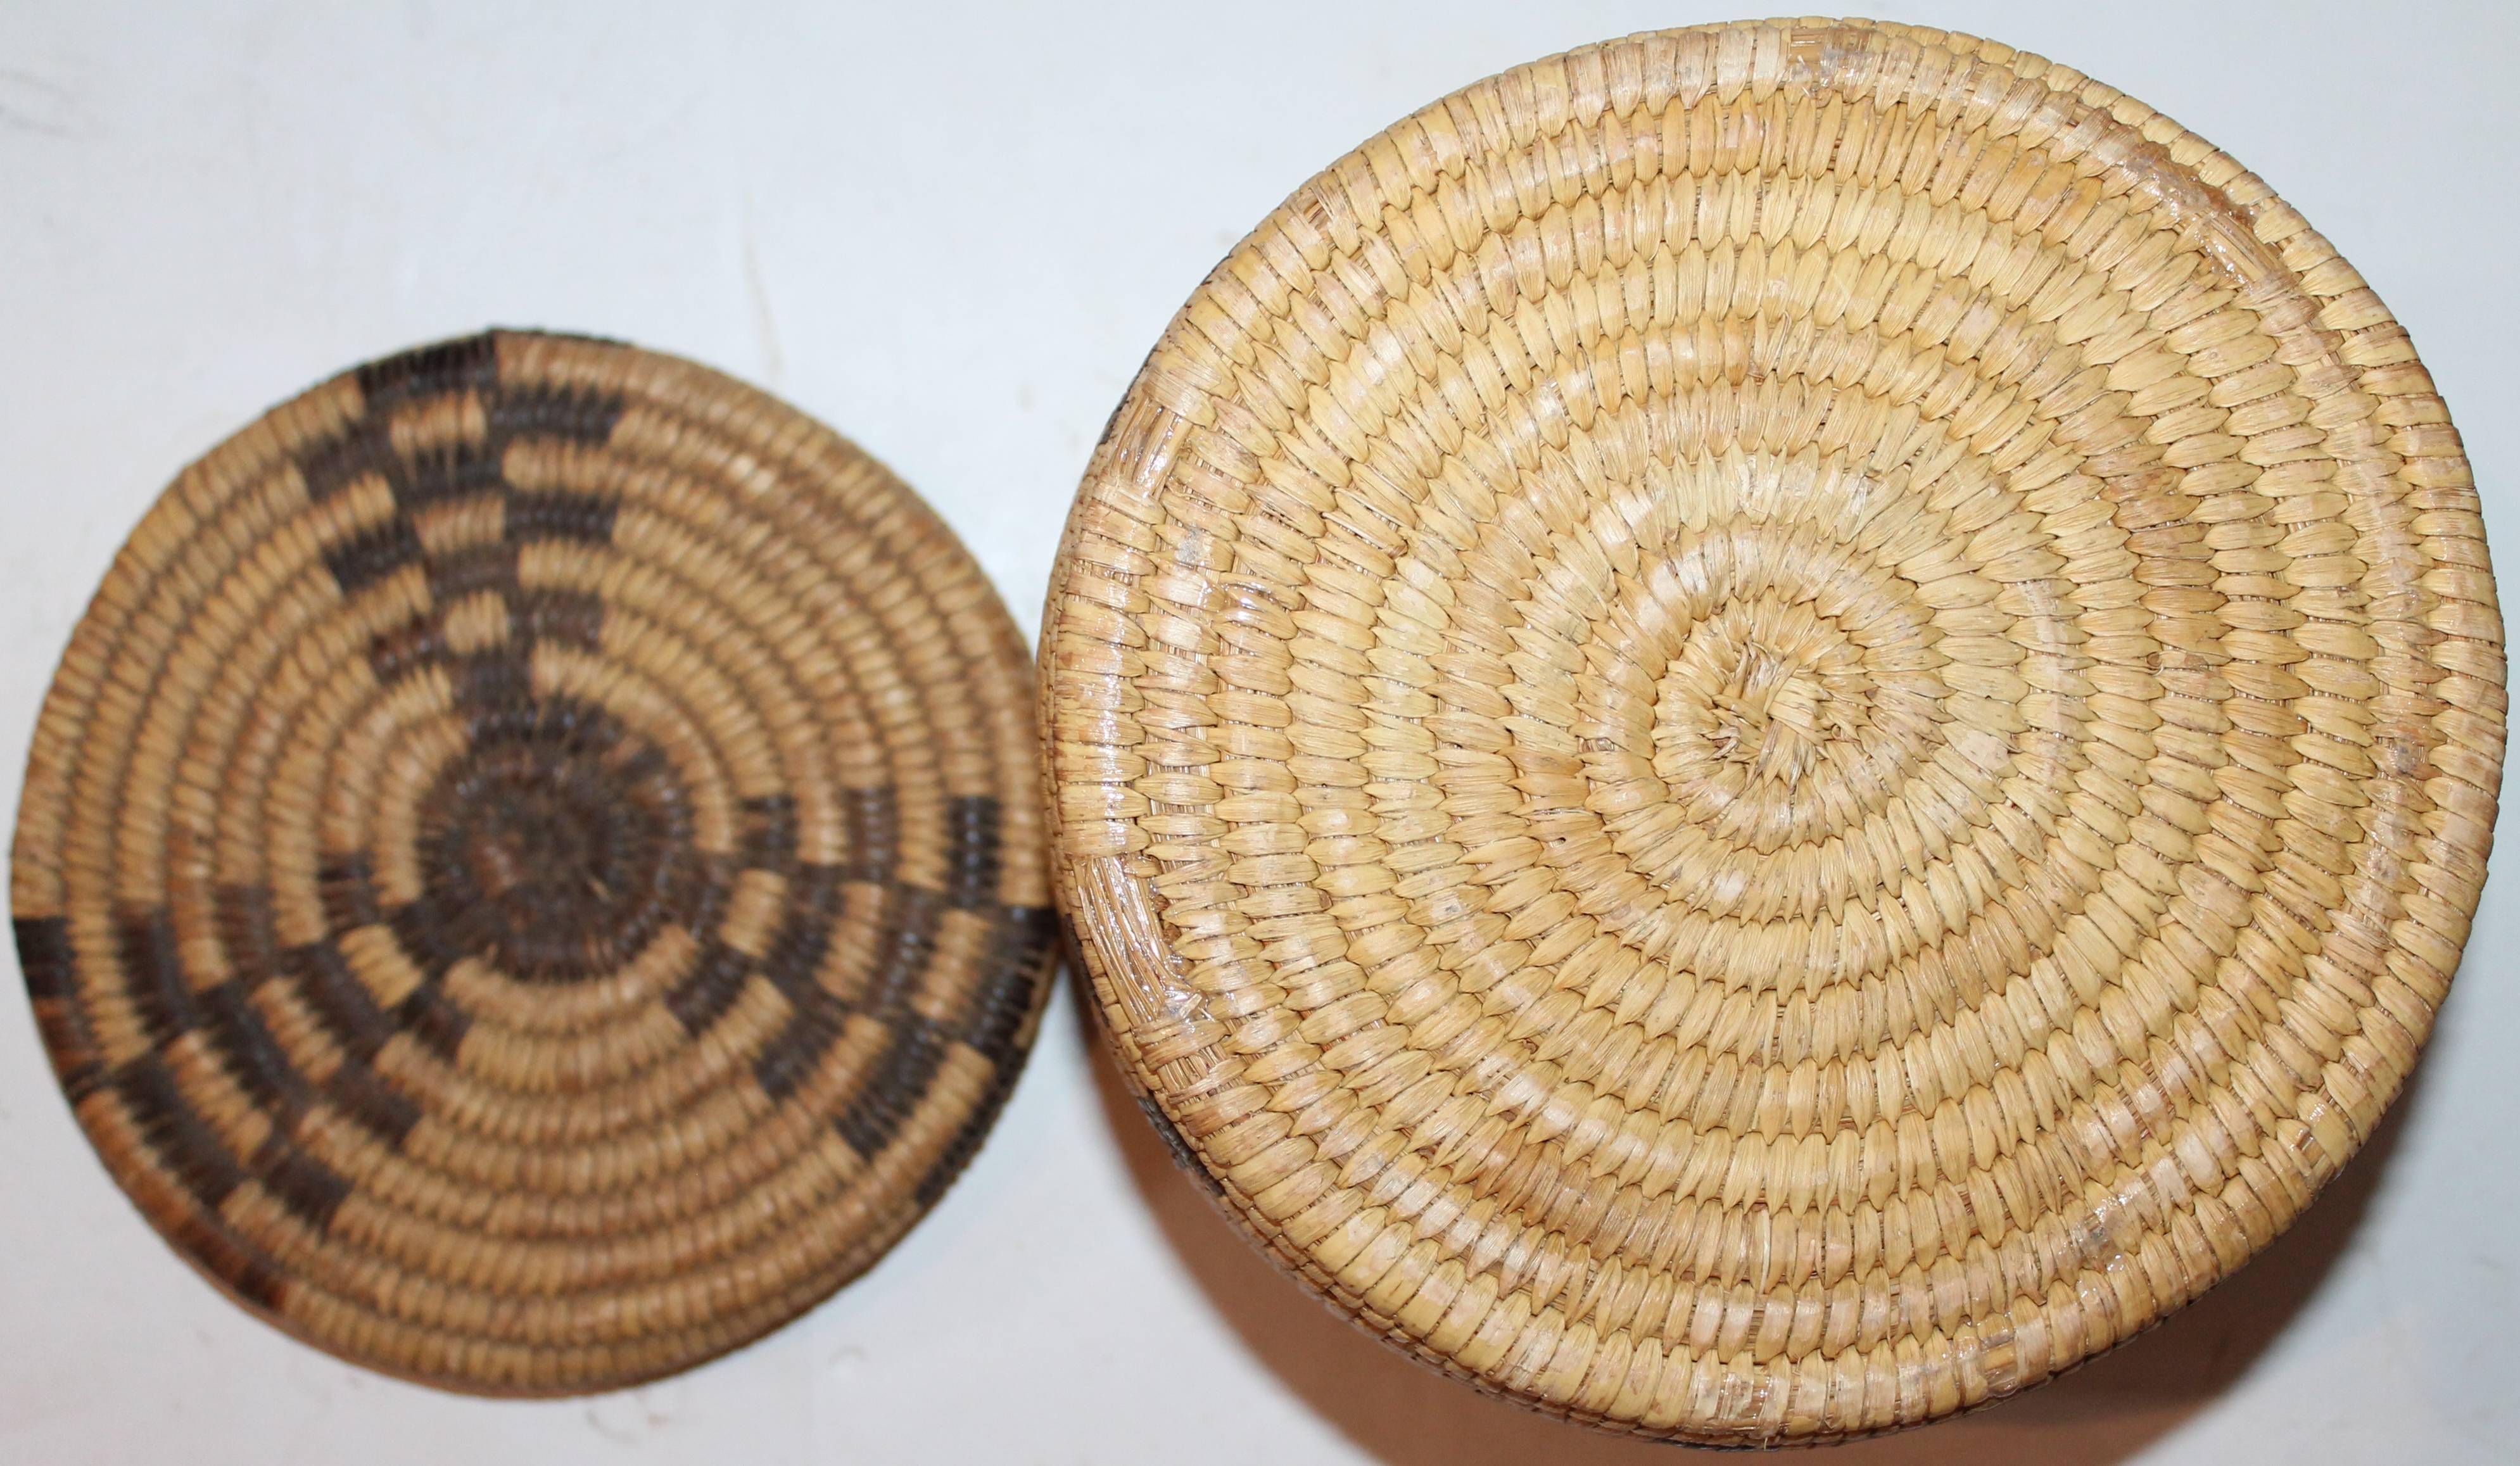 Willow Pair of Amazing Papago Indian Pictorial Baskets